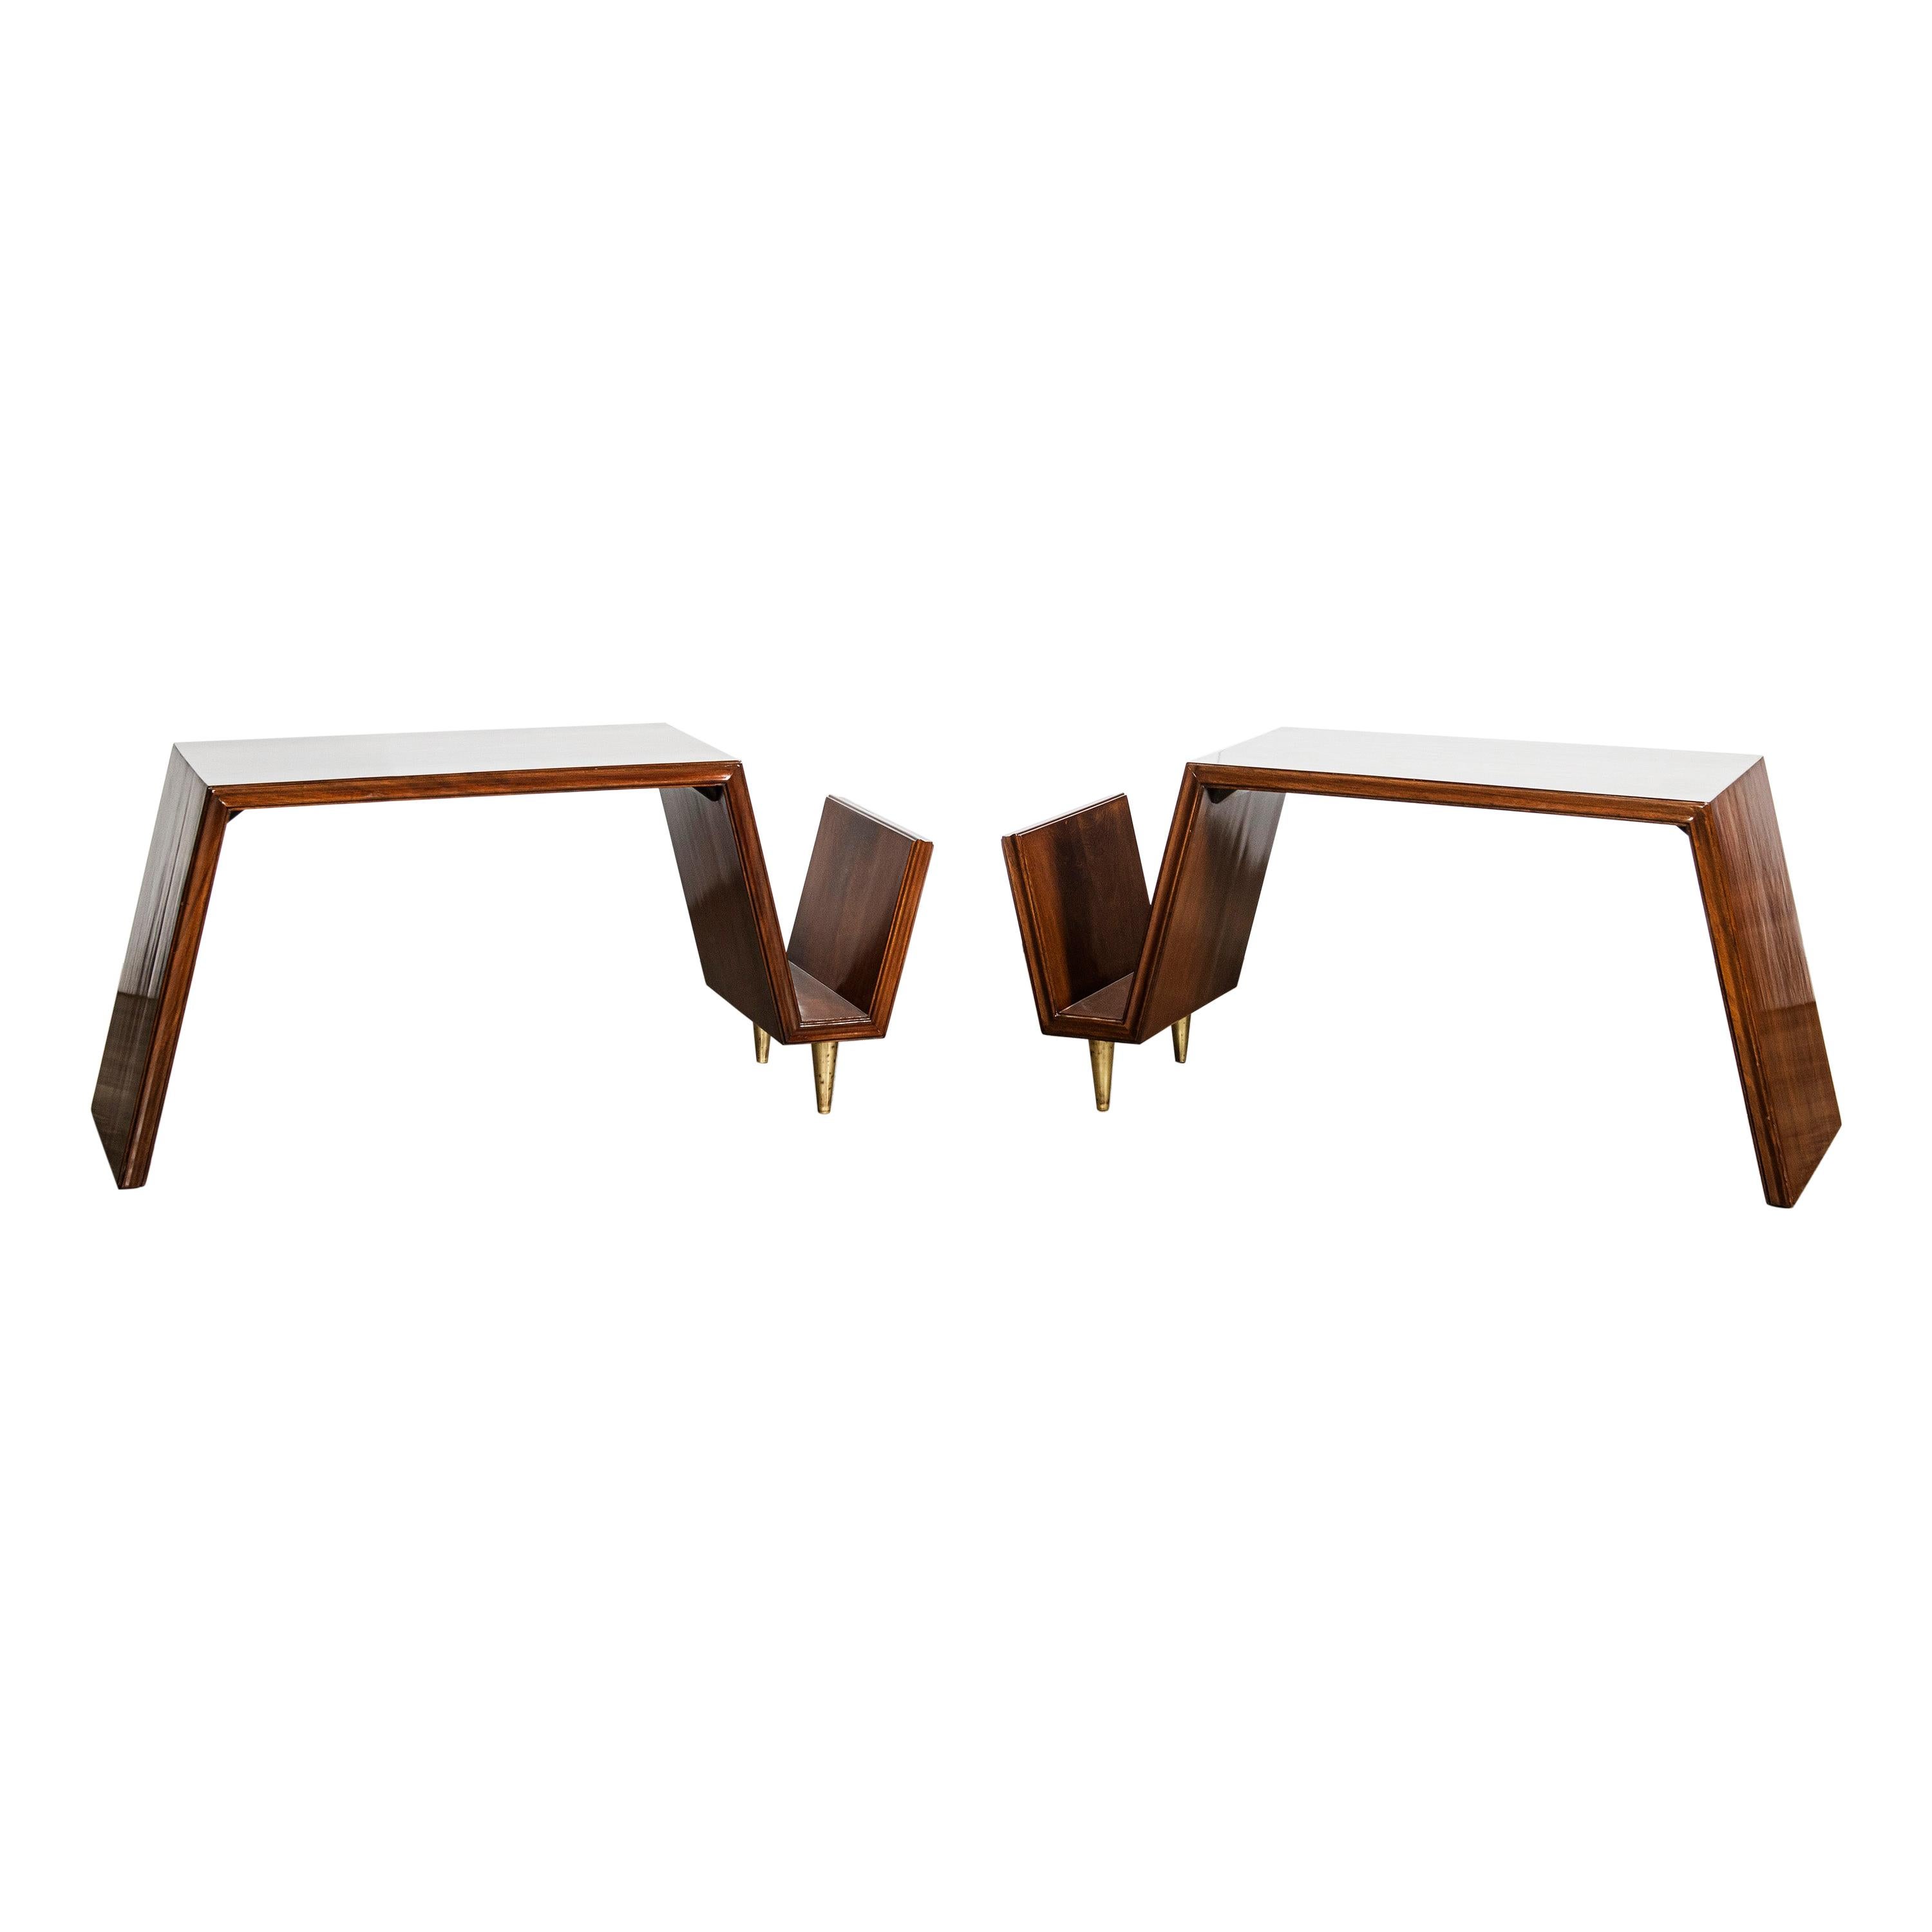 Pair of Wood and Bronze Side Tables by Nordiska, Argentina, Buenos Aires, 1950 For Sale